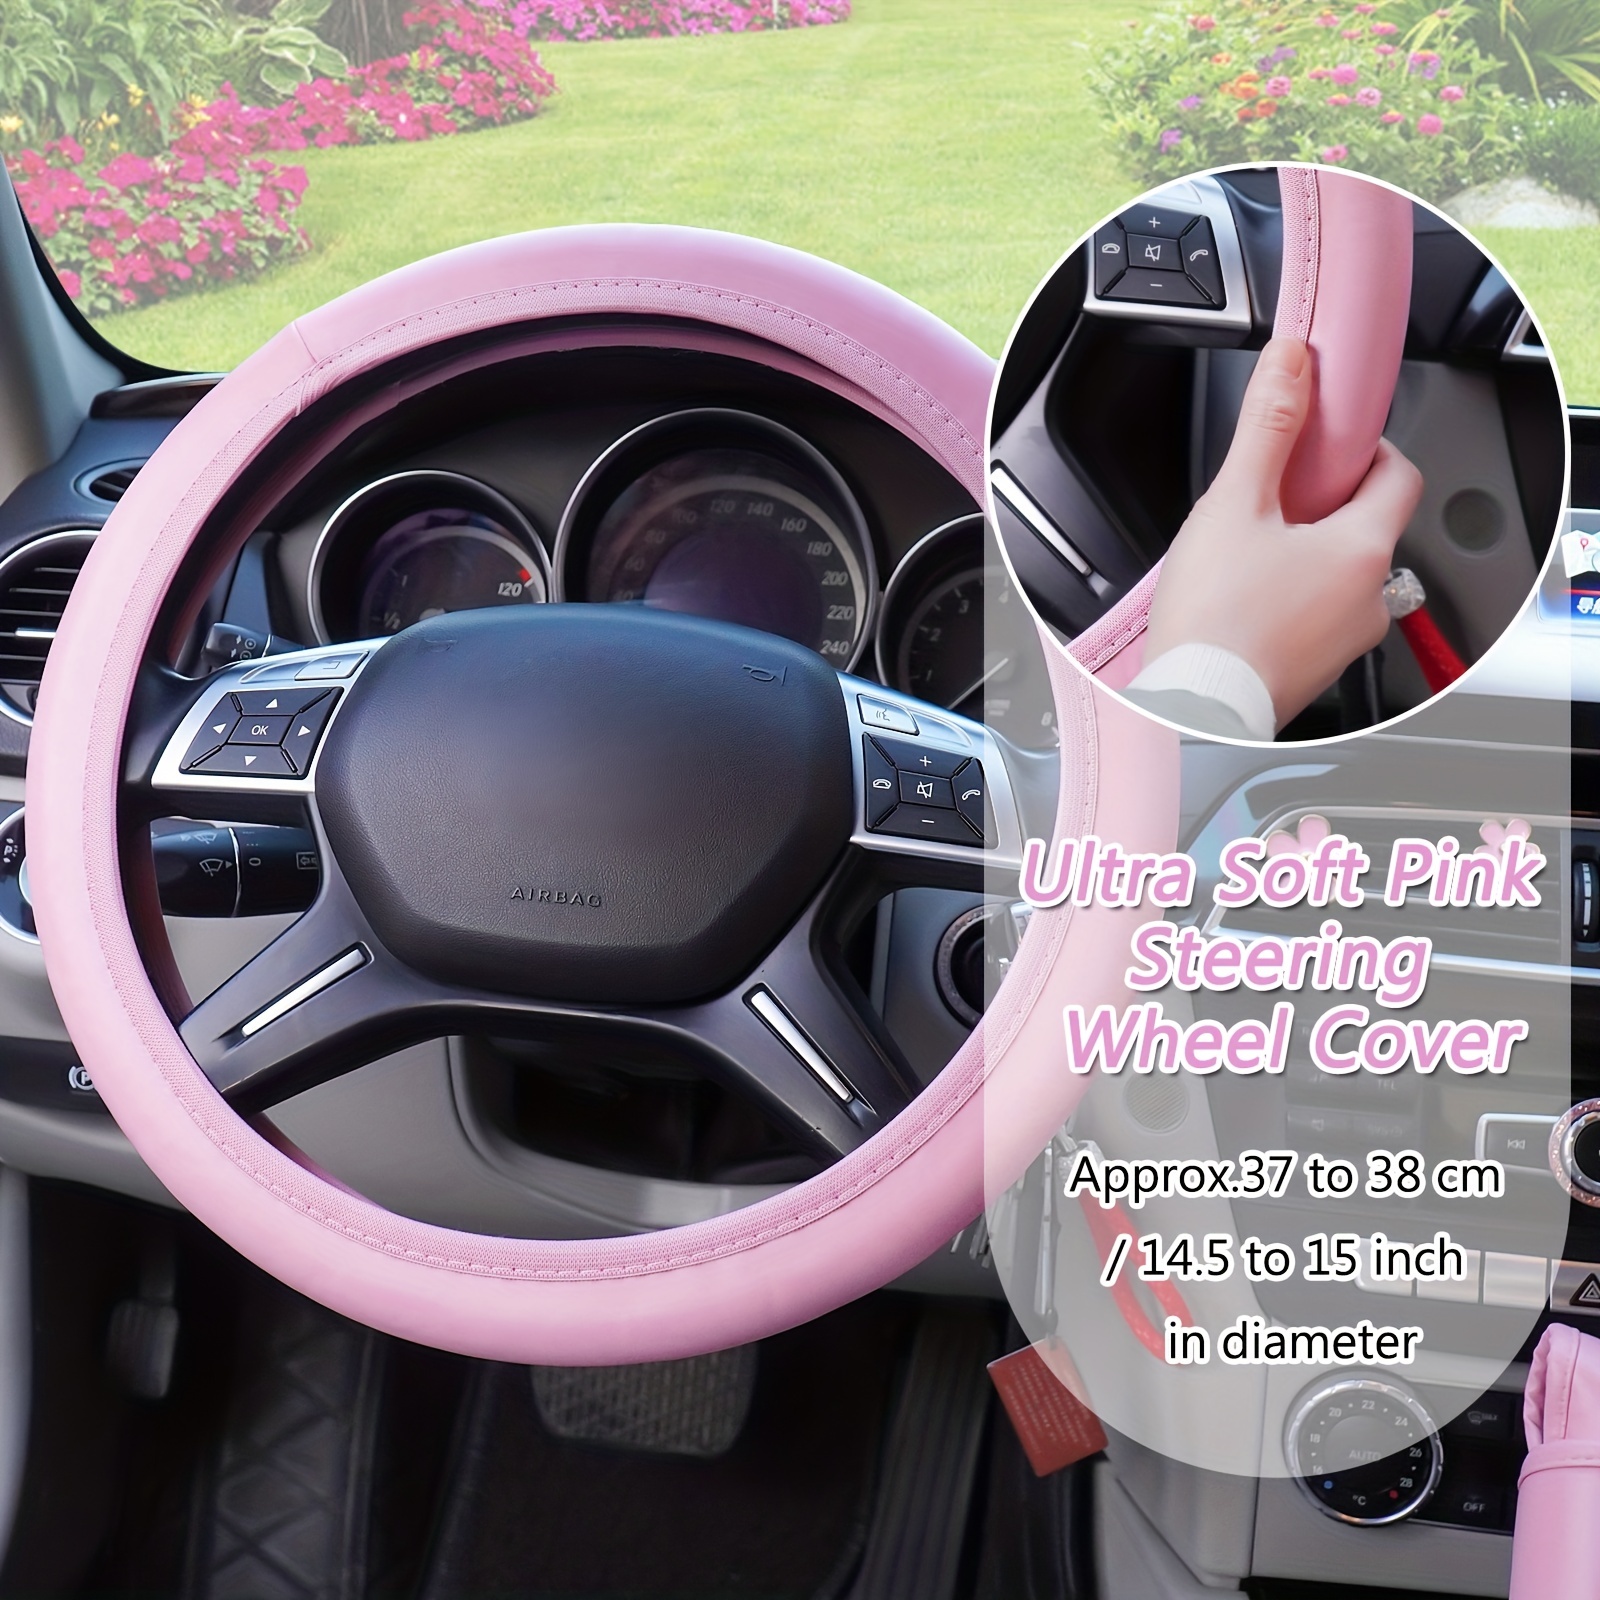 Steering Wheel Cover for Women Leather Universal Steering Wheel Covers for  Car 15 inch (Pink)